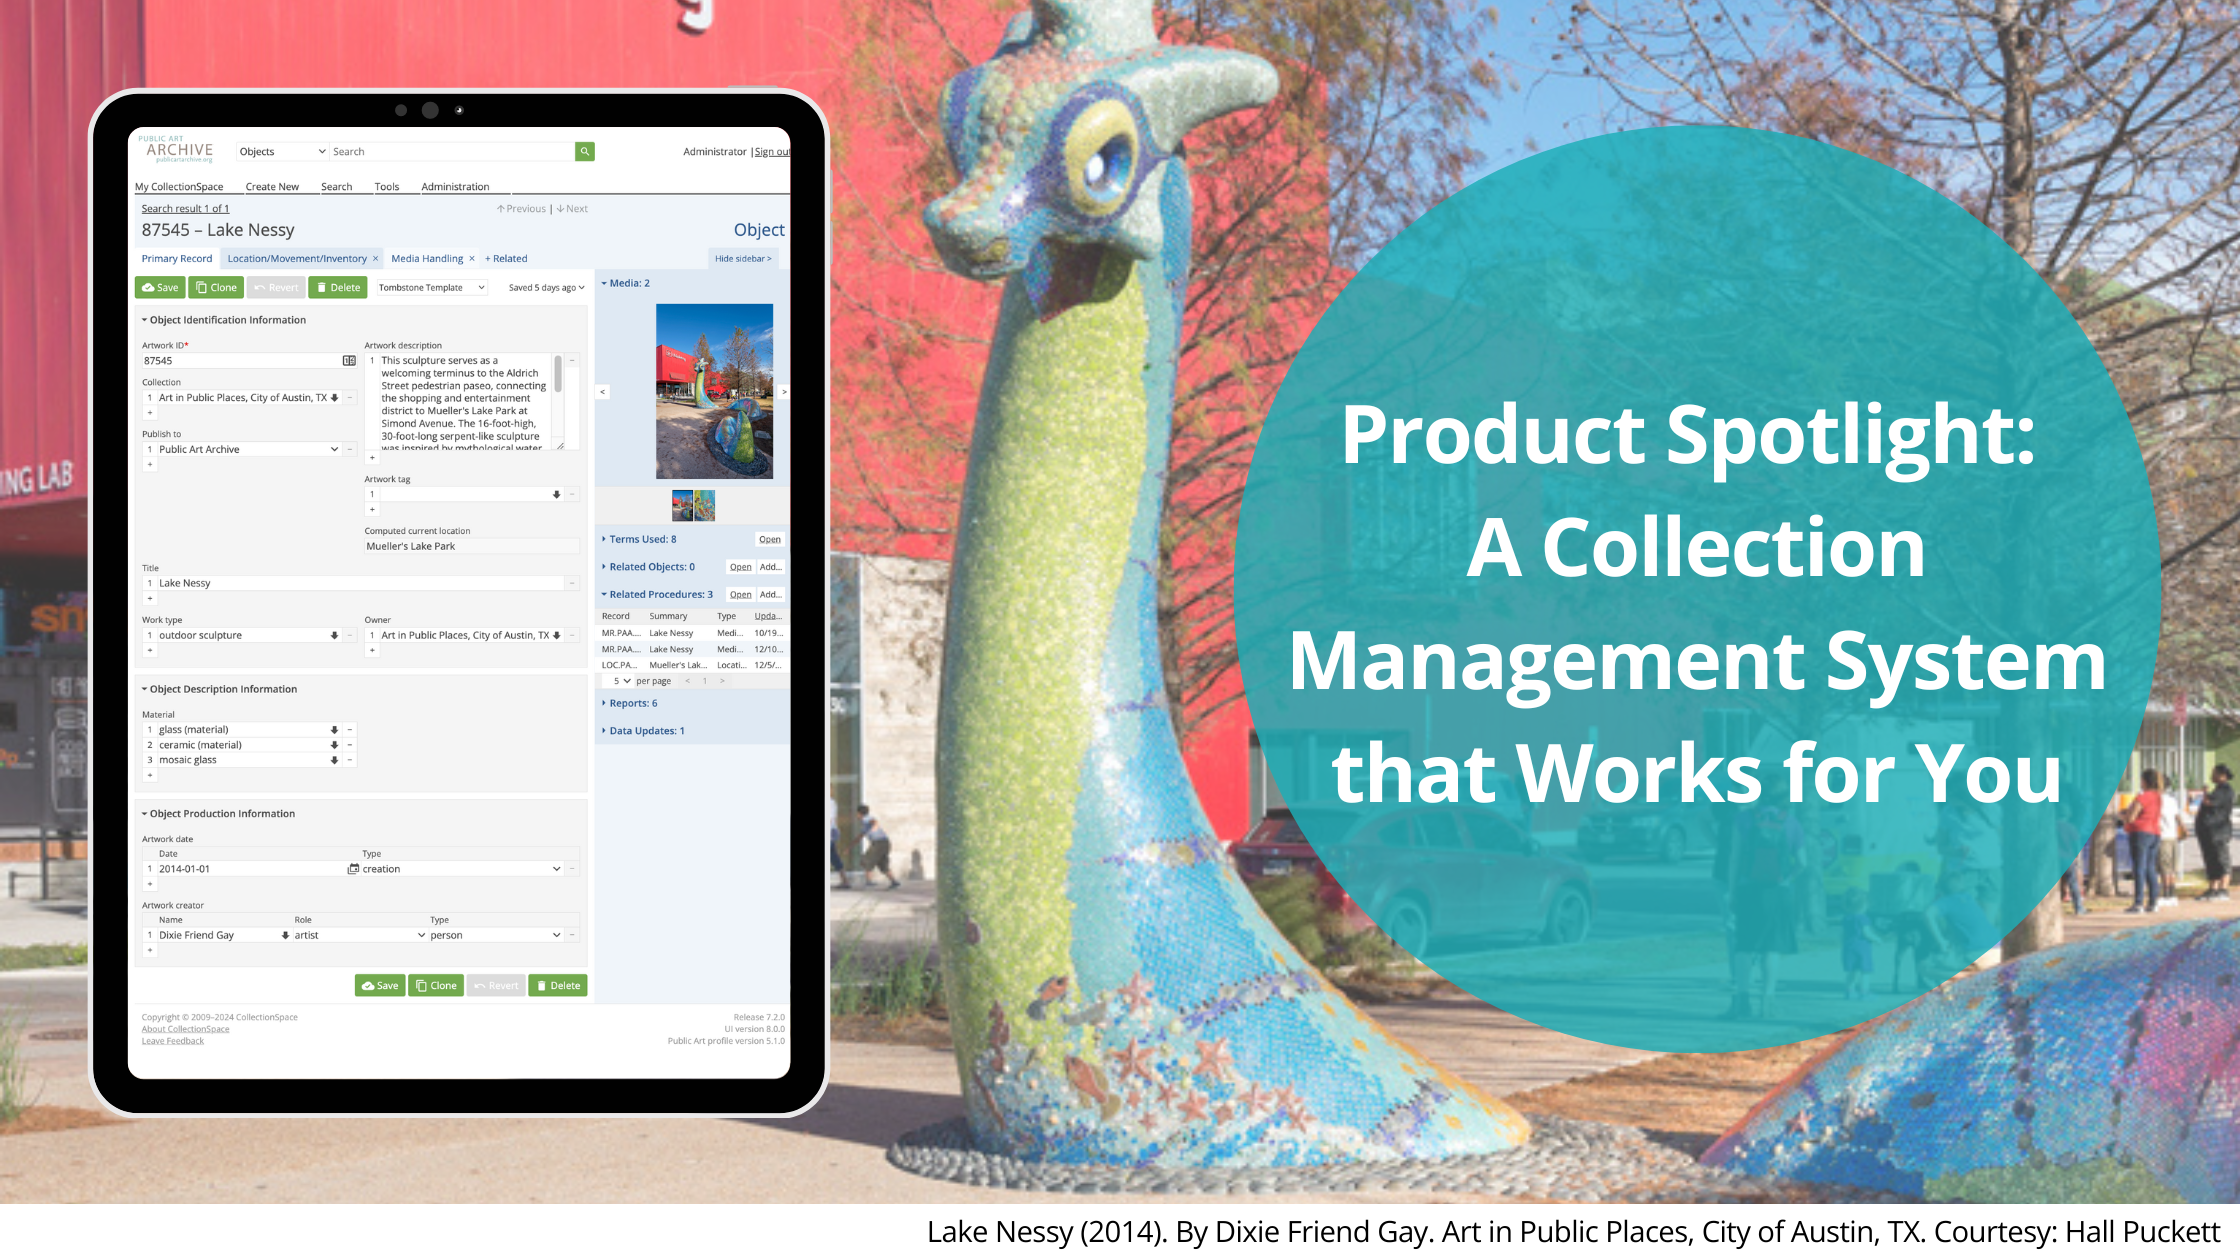 Product Spotlight: A Collection Management System that Works for You